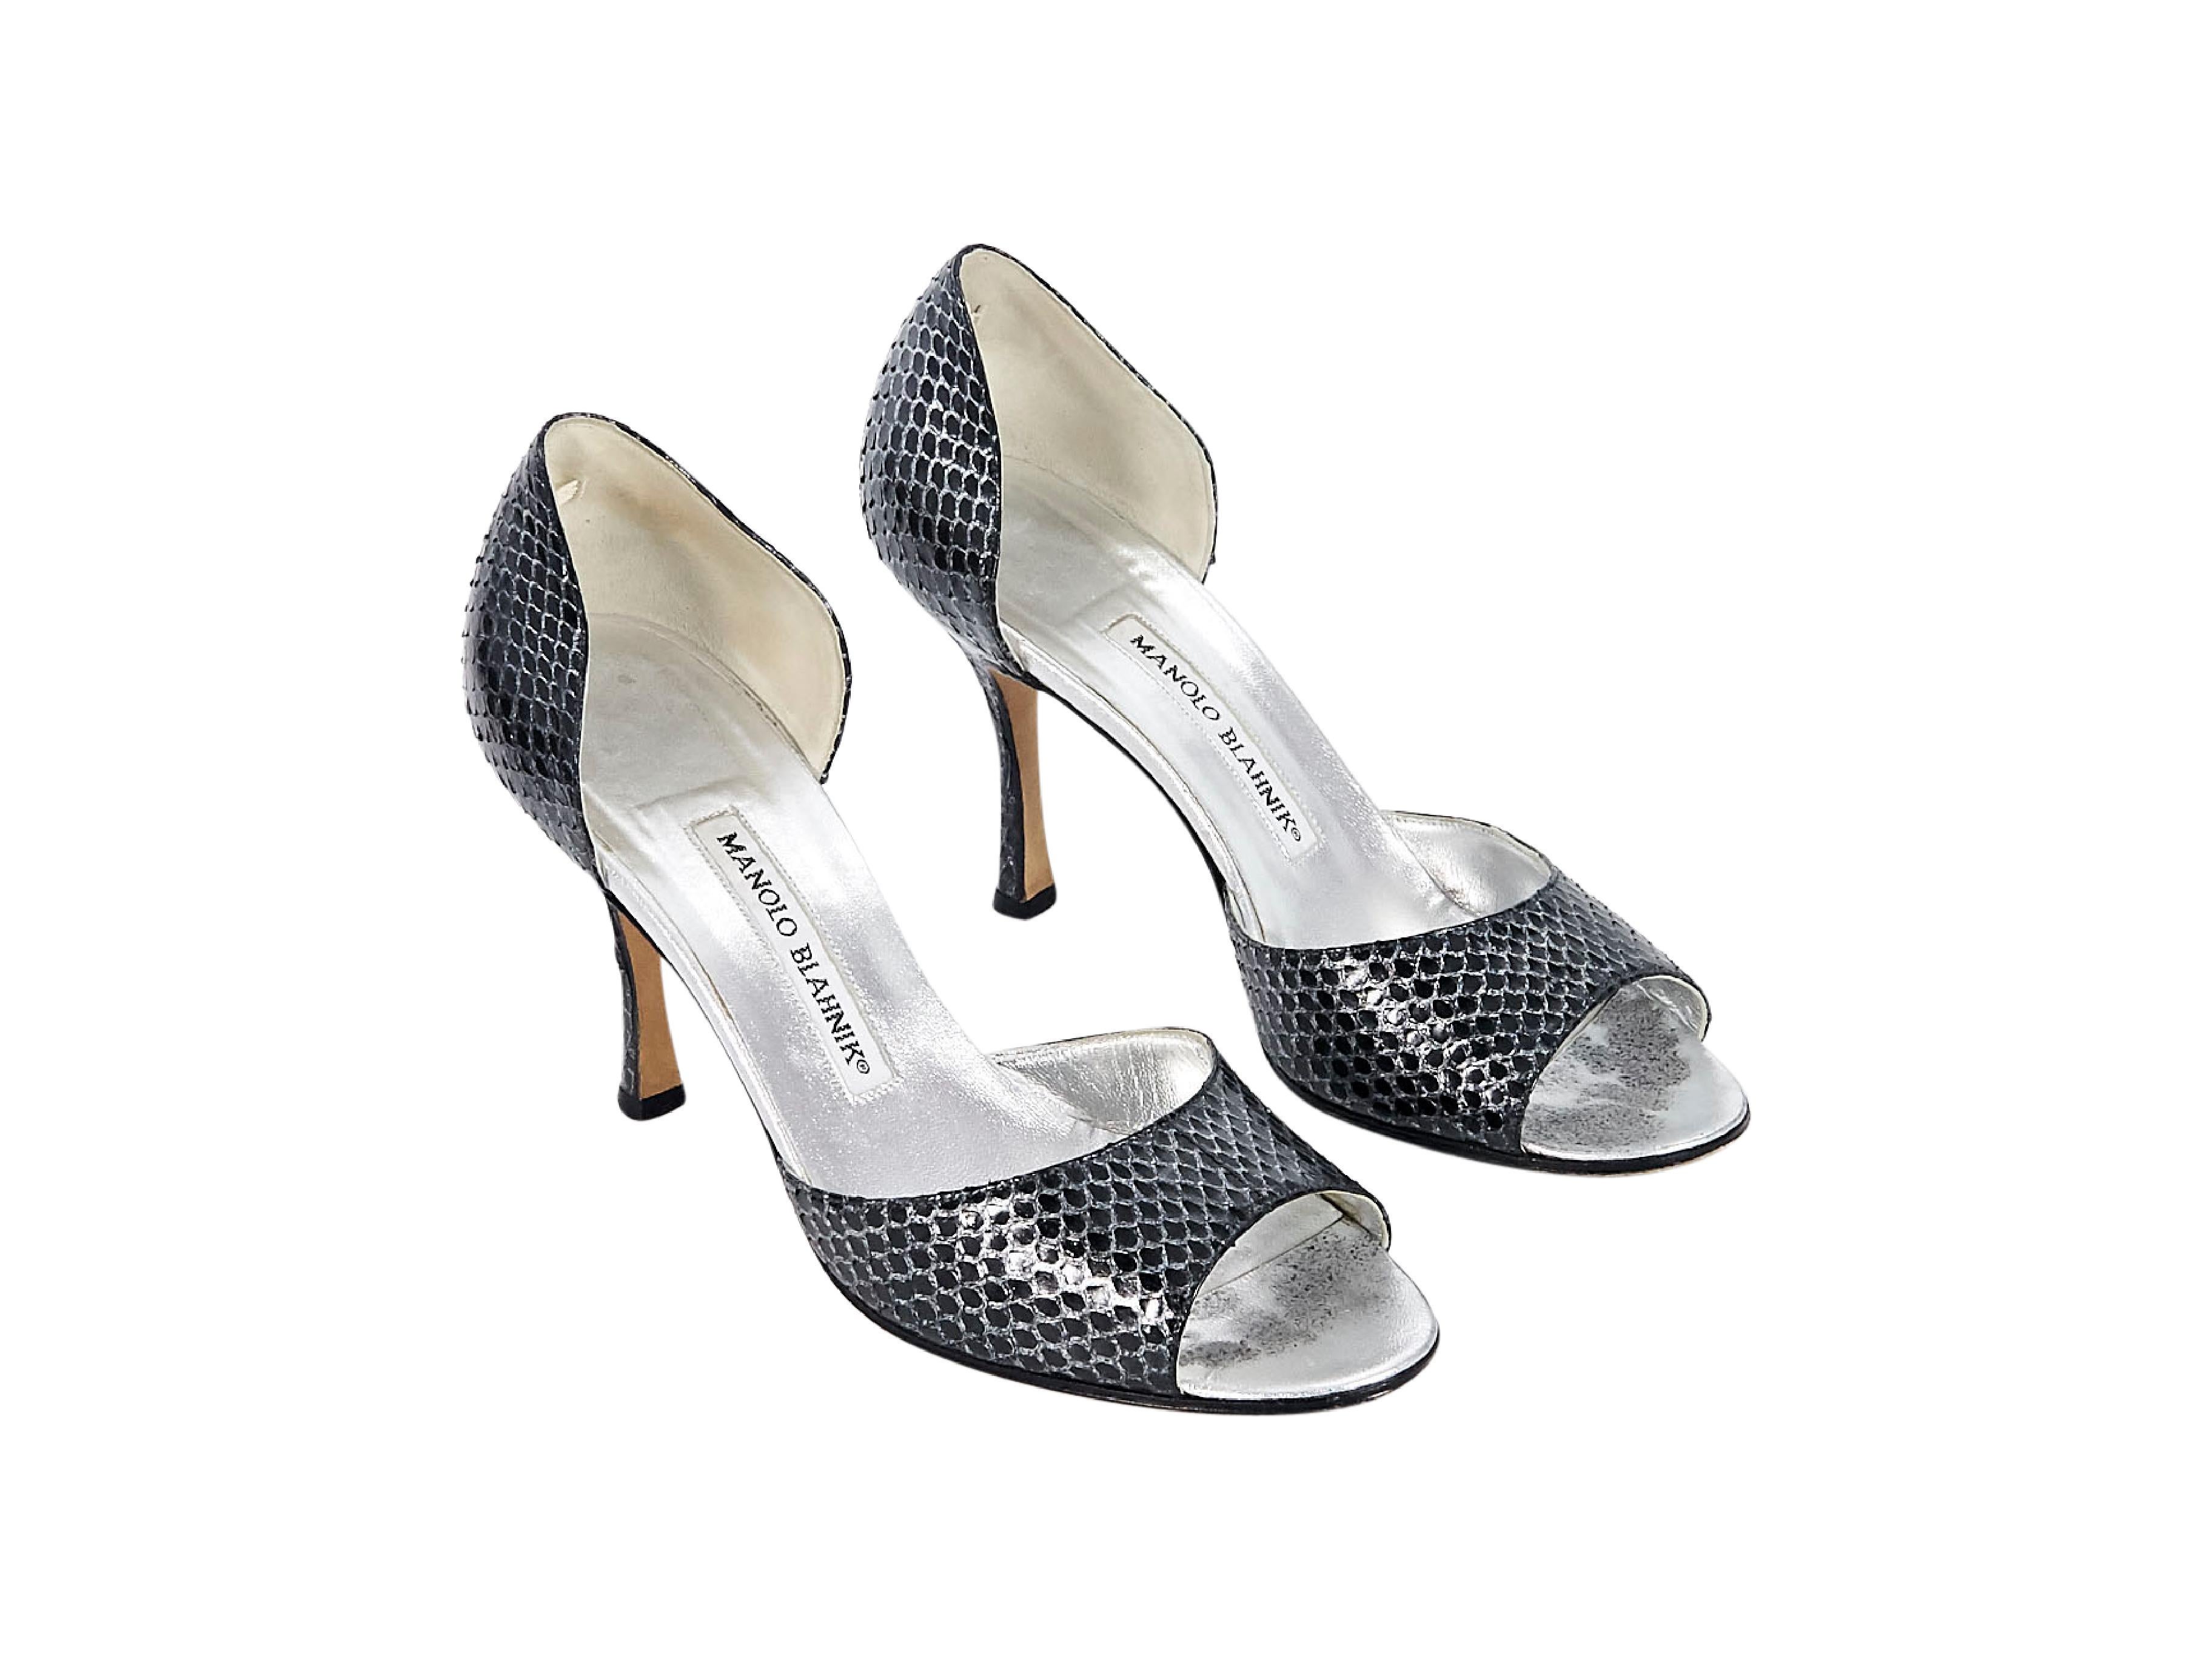 Product details:  Black and silver snakeskin d'Orsay sandals by Manolo Blahnik.  Open toe.  Slip-on style.  3.5